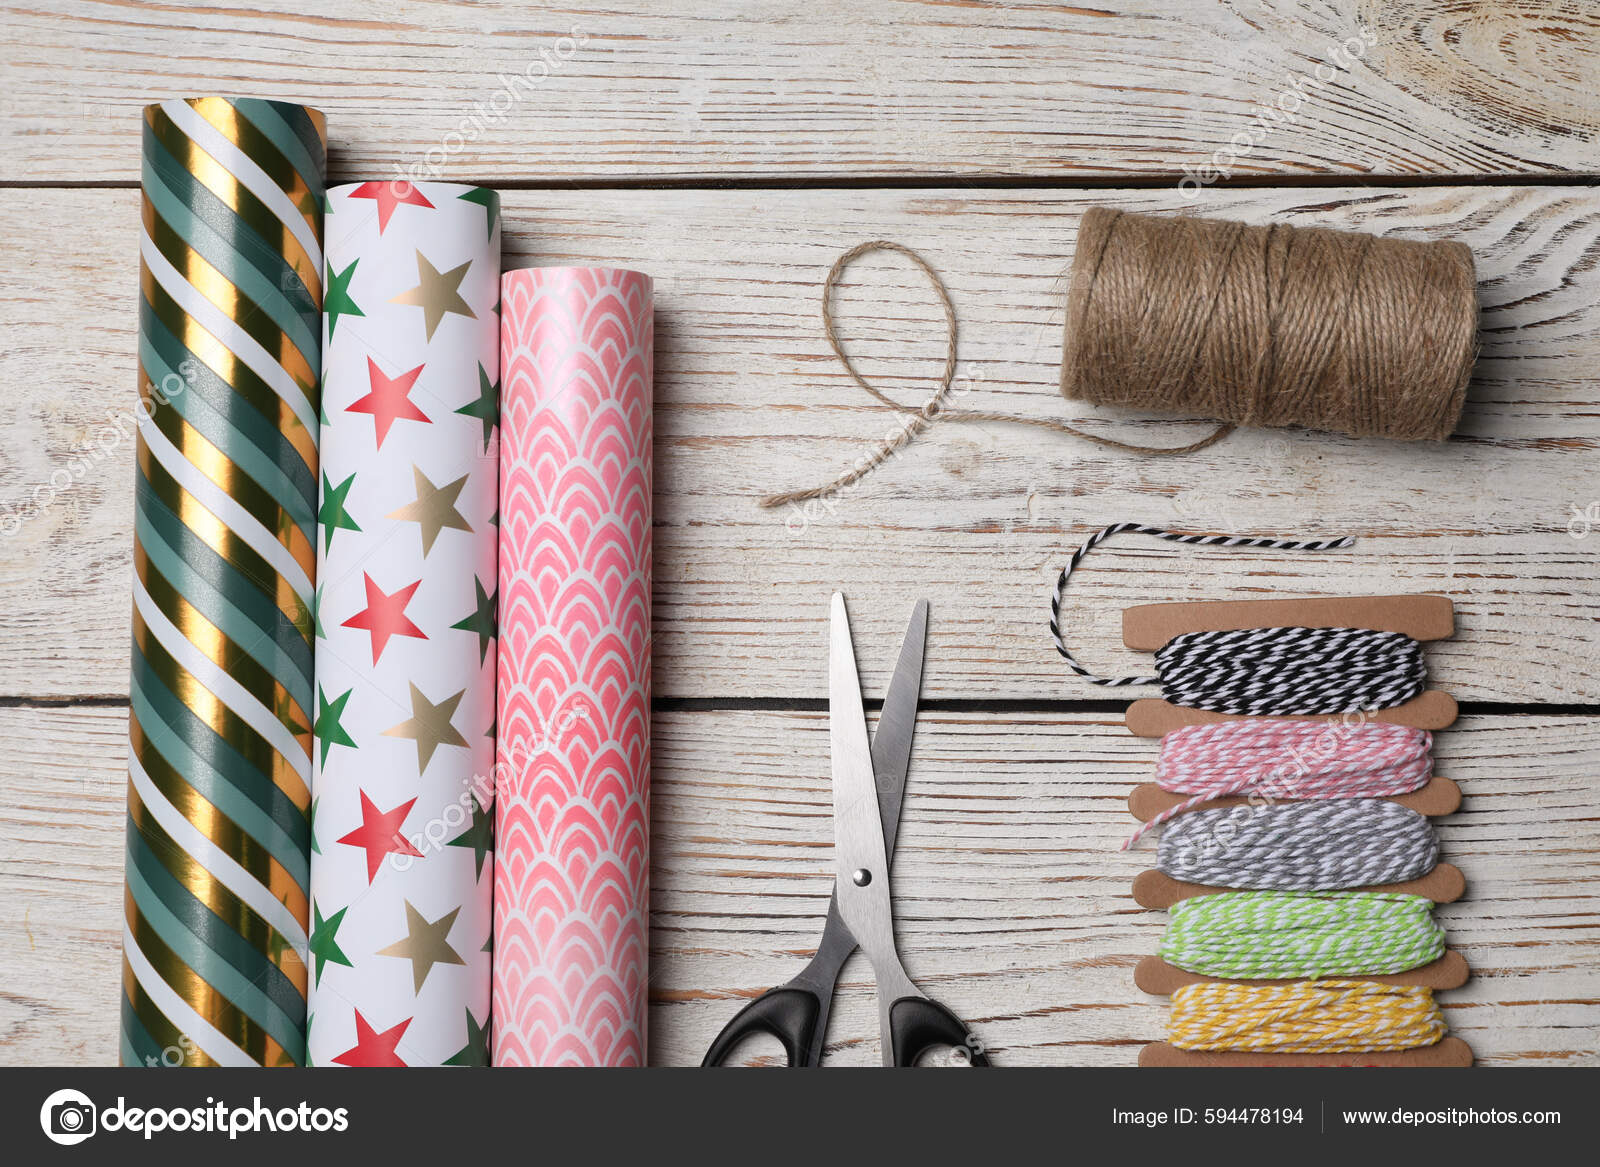 https://st.depositphotos.com/16122460/59447/i/1600/depositphotos_594478194-stock-photo-different-colorful-wrapping-paper-rolls.jpg